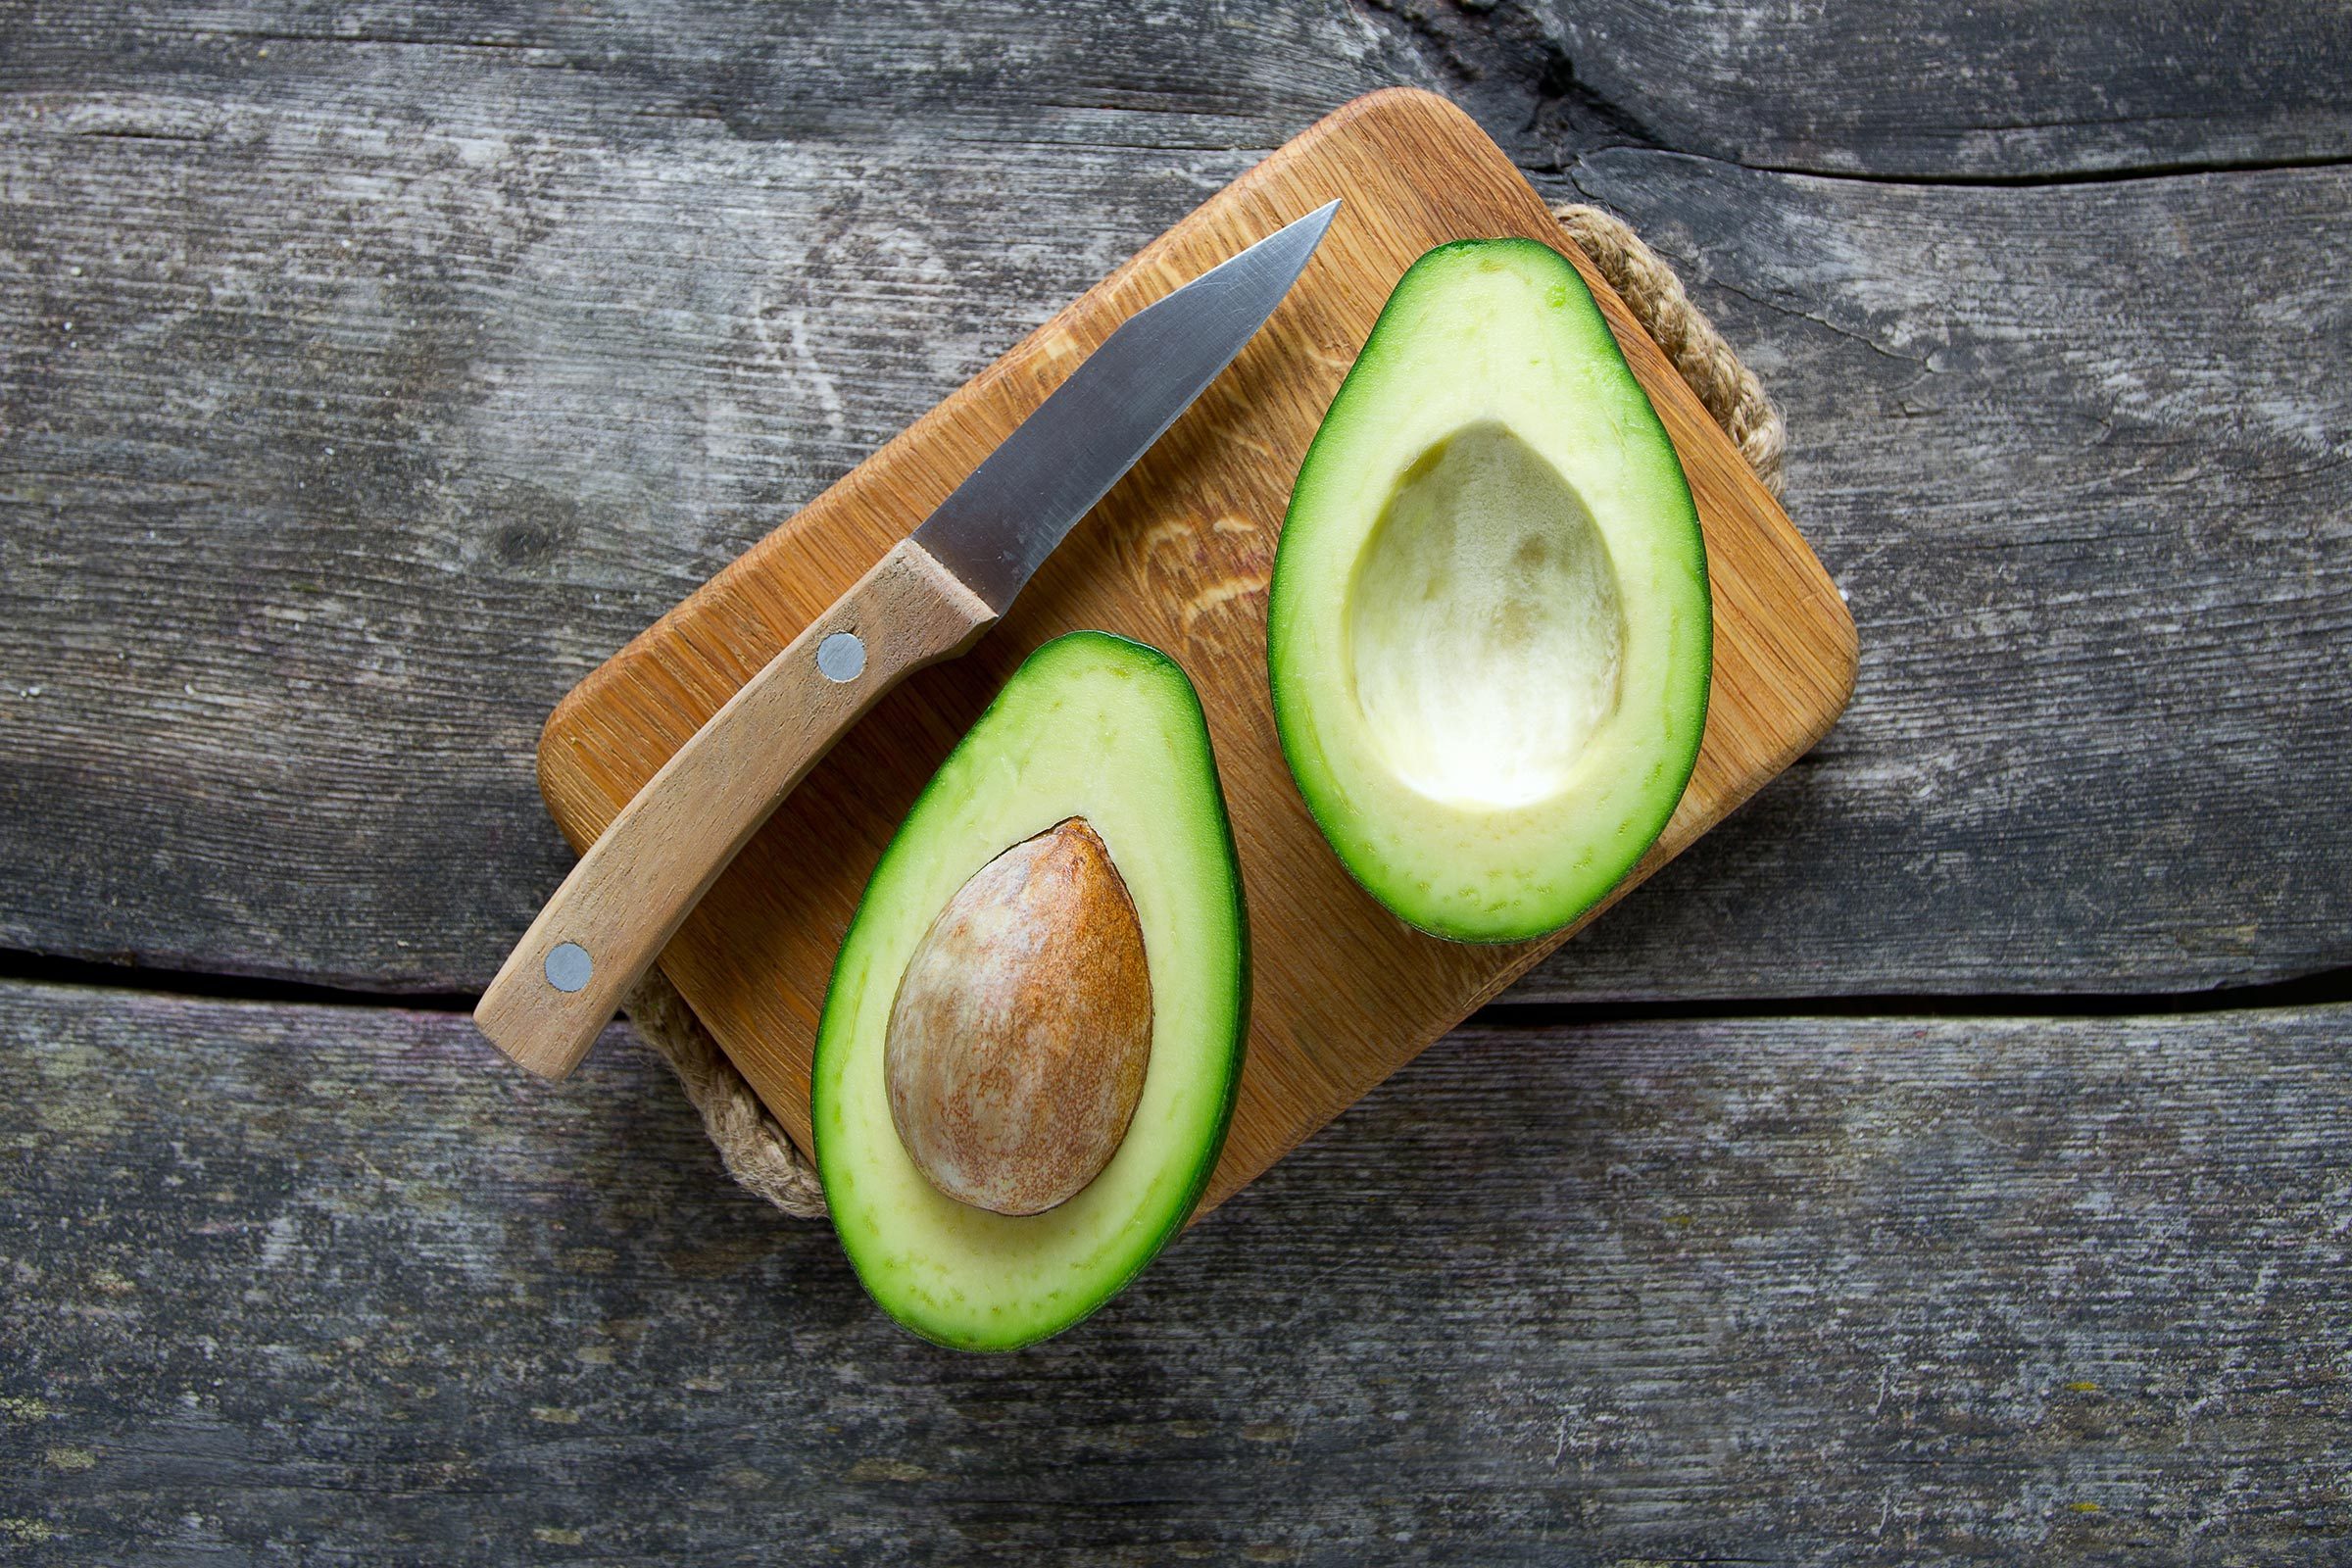 Fresh Market Avocado Cut In Half On A Wooden Cutting Board Next To A Knife  With More Avocados In The Background In A Cotton Reusable Shopping Bag  Stock Photo - Download Image